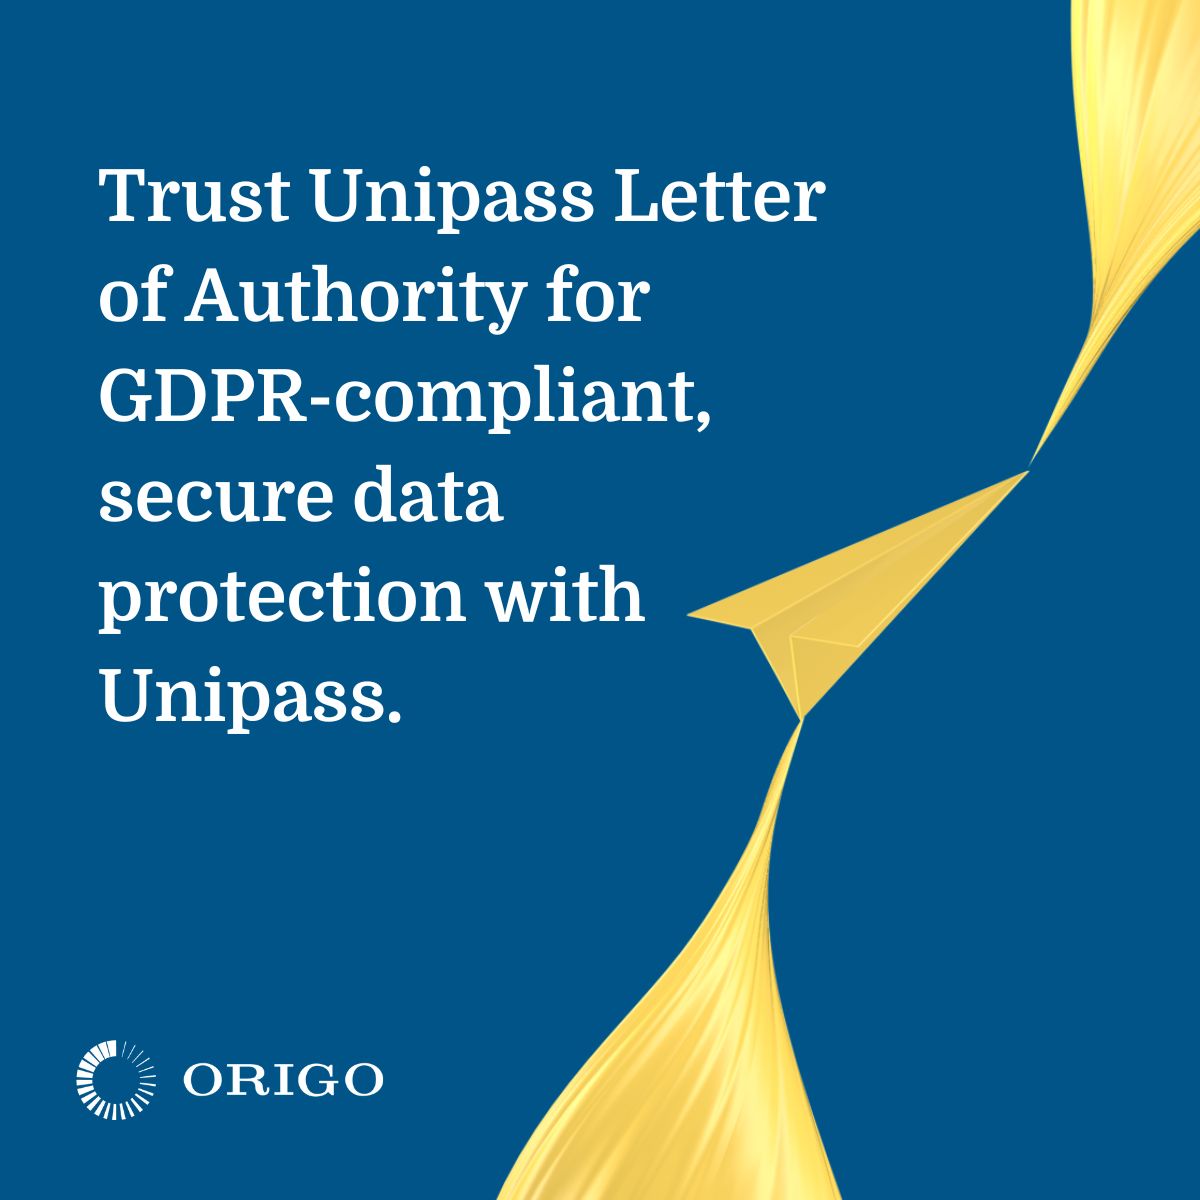 Protect client data with Unipass Letter of Authority (ULoA) 🛡️ Our LoA service is fortified with Unipass at its core, ensuring GDPR compliance and top-notch security. Whether remote or in-office, trust ULoA for a safer work environment. 
For more info: eu1.hubs.ly/H08CTpQ0